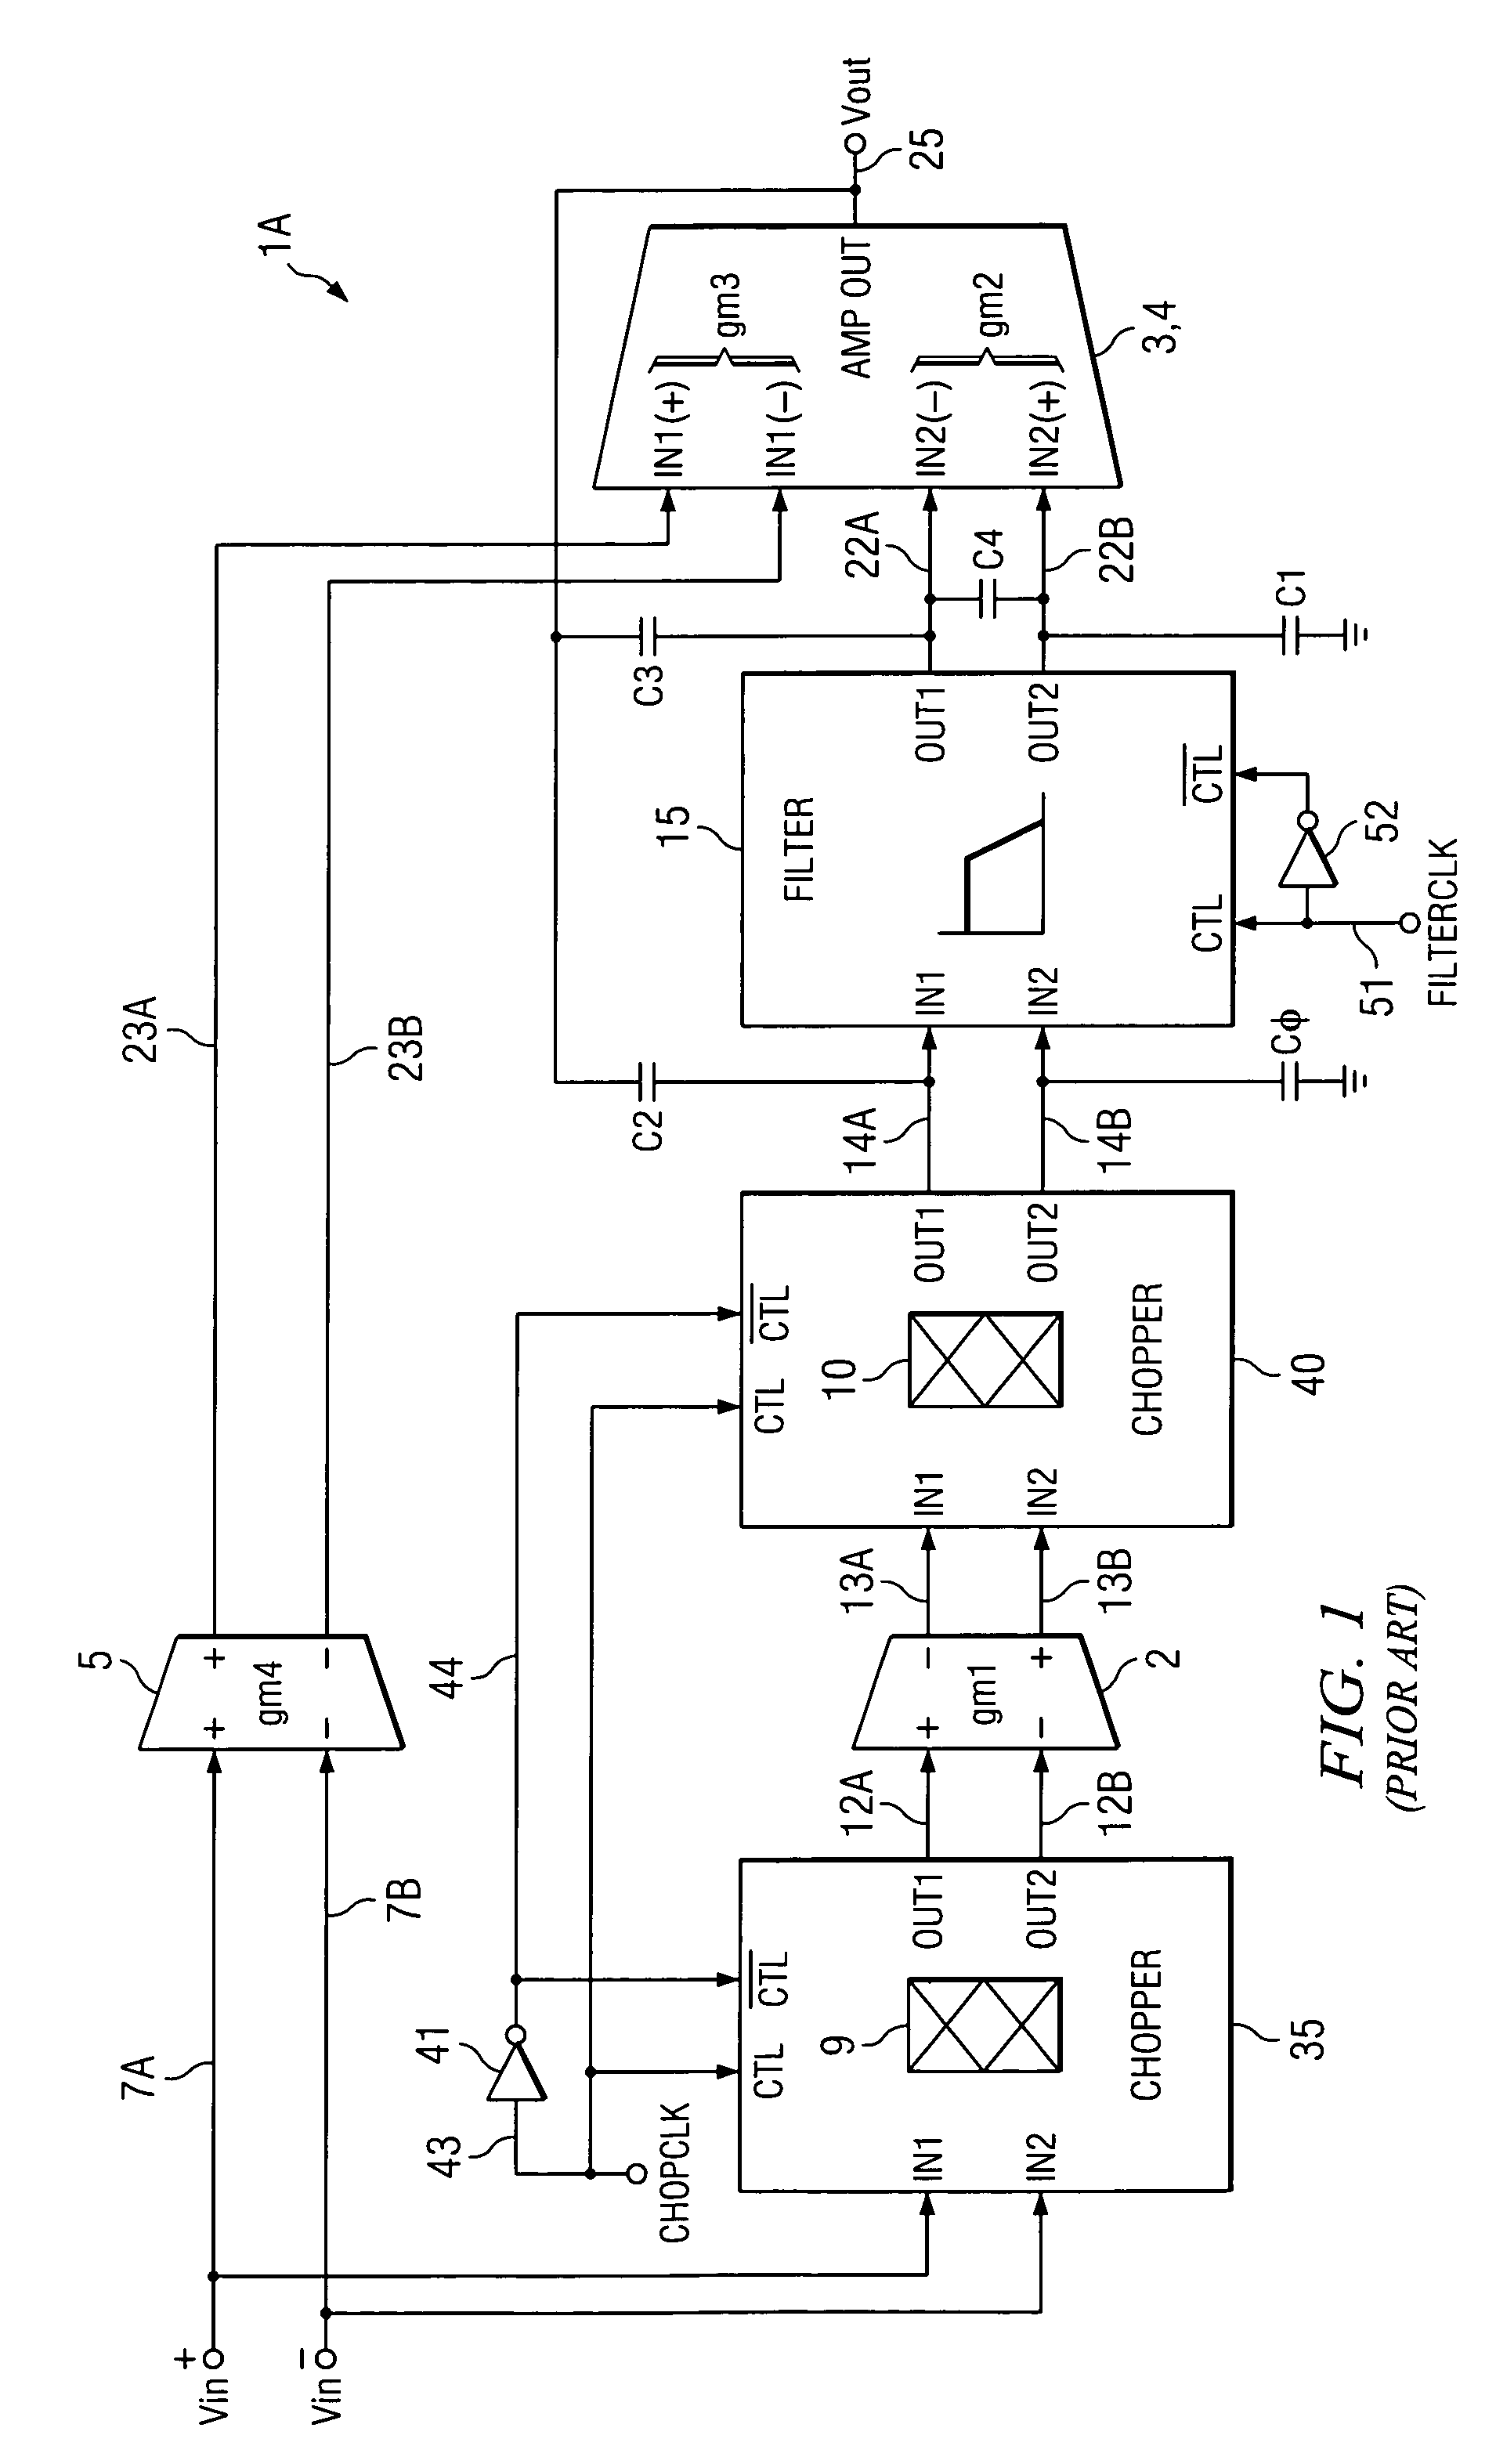 Simultaneous filtering and compensation circuitry and method in chopping amplifier